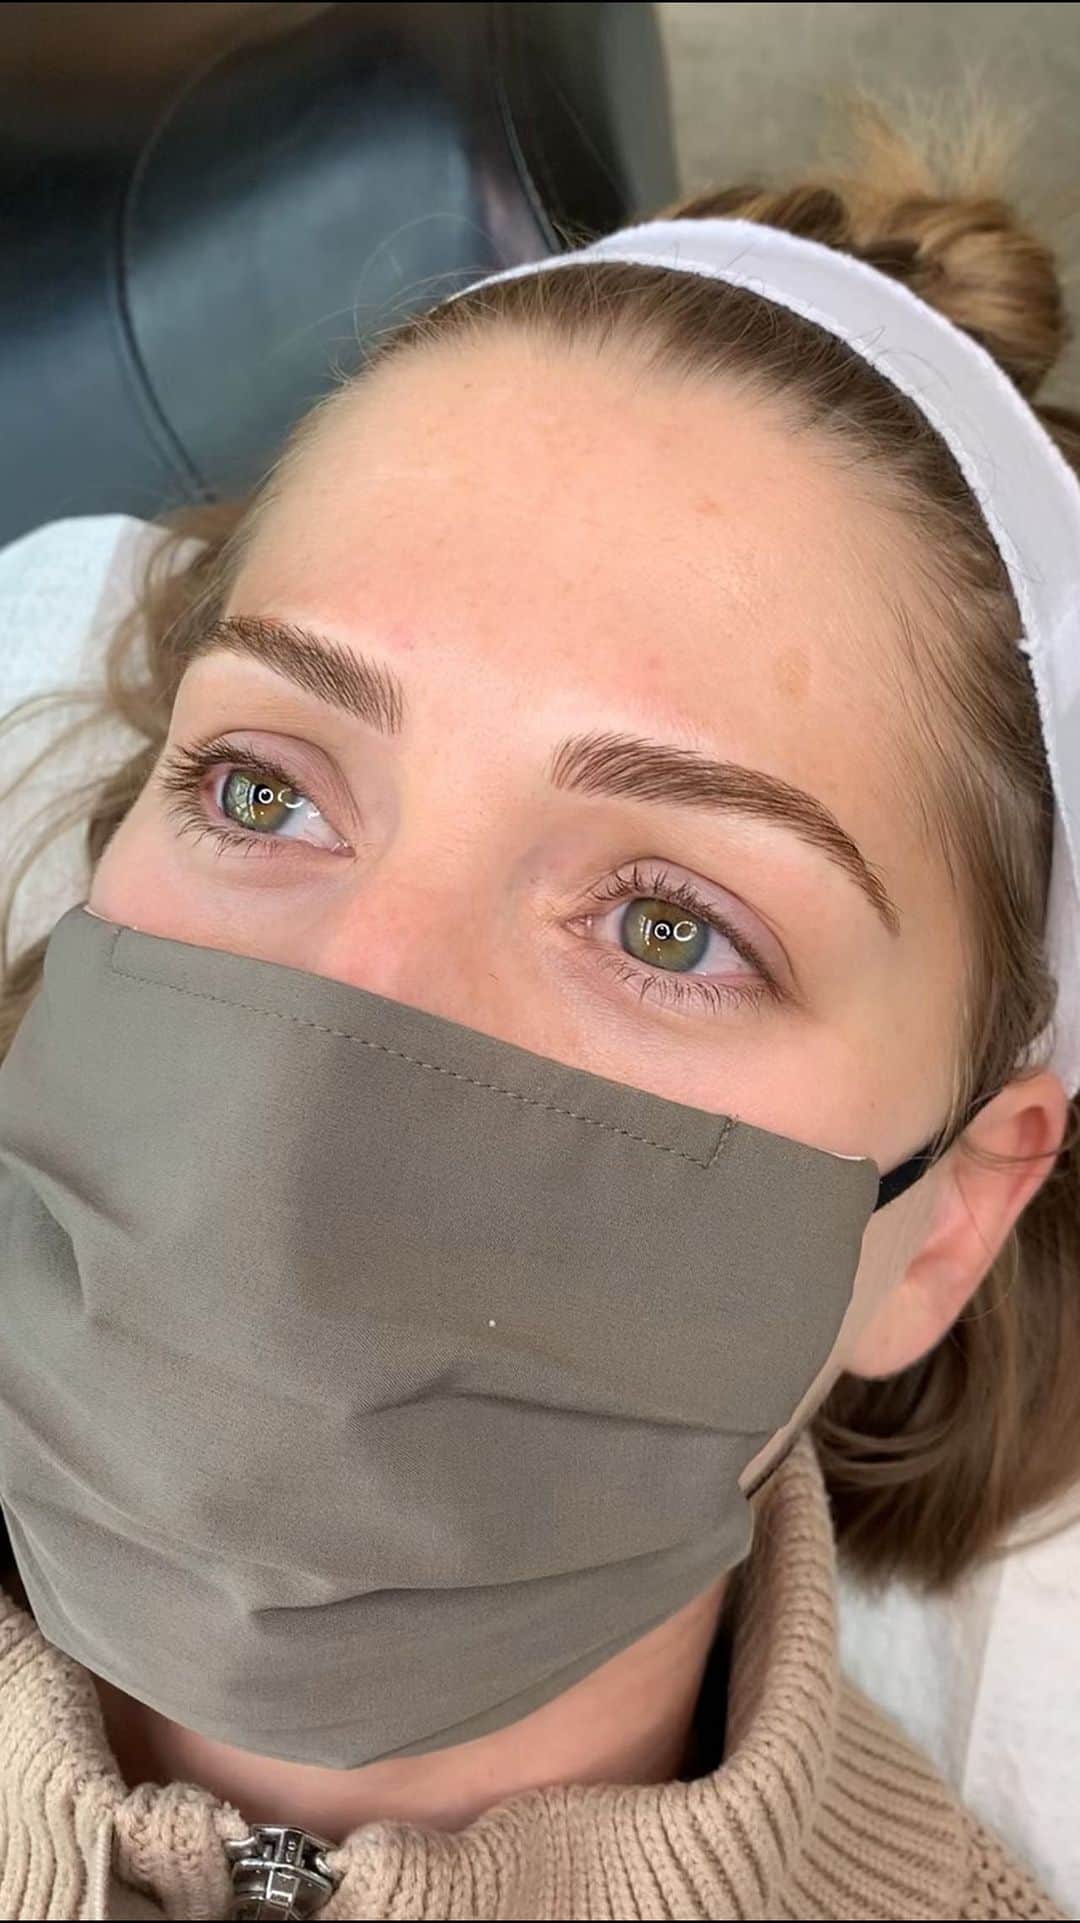 Haley Wightのインスタグラム：「Nanoblading Vs. Microblading- what is nanoblading? Nanoblading is the same technique as microblading, just with a smaller needle size. This gives the appearance of finer hairstrokes resulting in a more natural look! We just refer to it as Microblading mostly because that’s the name people recognize and know. But the more technical term is nanoblading 😄 I only offer nanoblading and have for yeeeeears!  Call to book with me (602)809-9405 or visit our website Daelascottsdale.com 🤍  #microblading #nanoblading #arizona #az #phoenix #scottsdale #microbladingaz #arizonamicroblading」